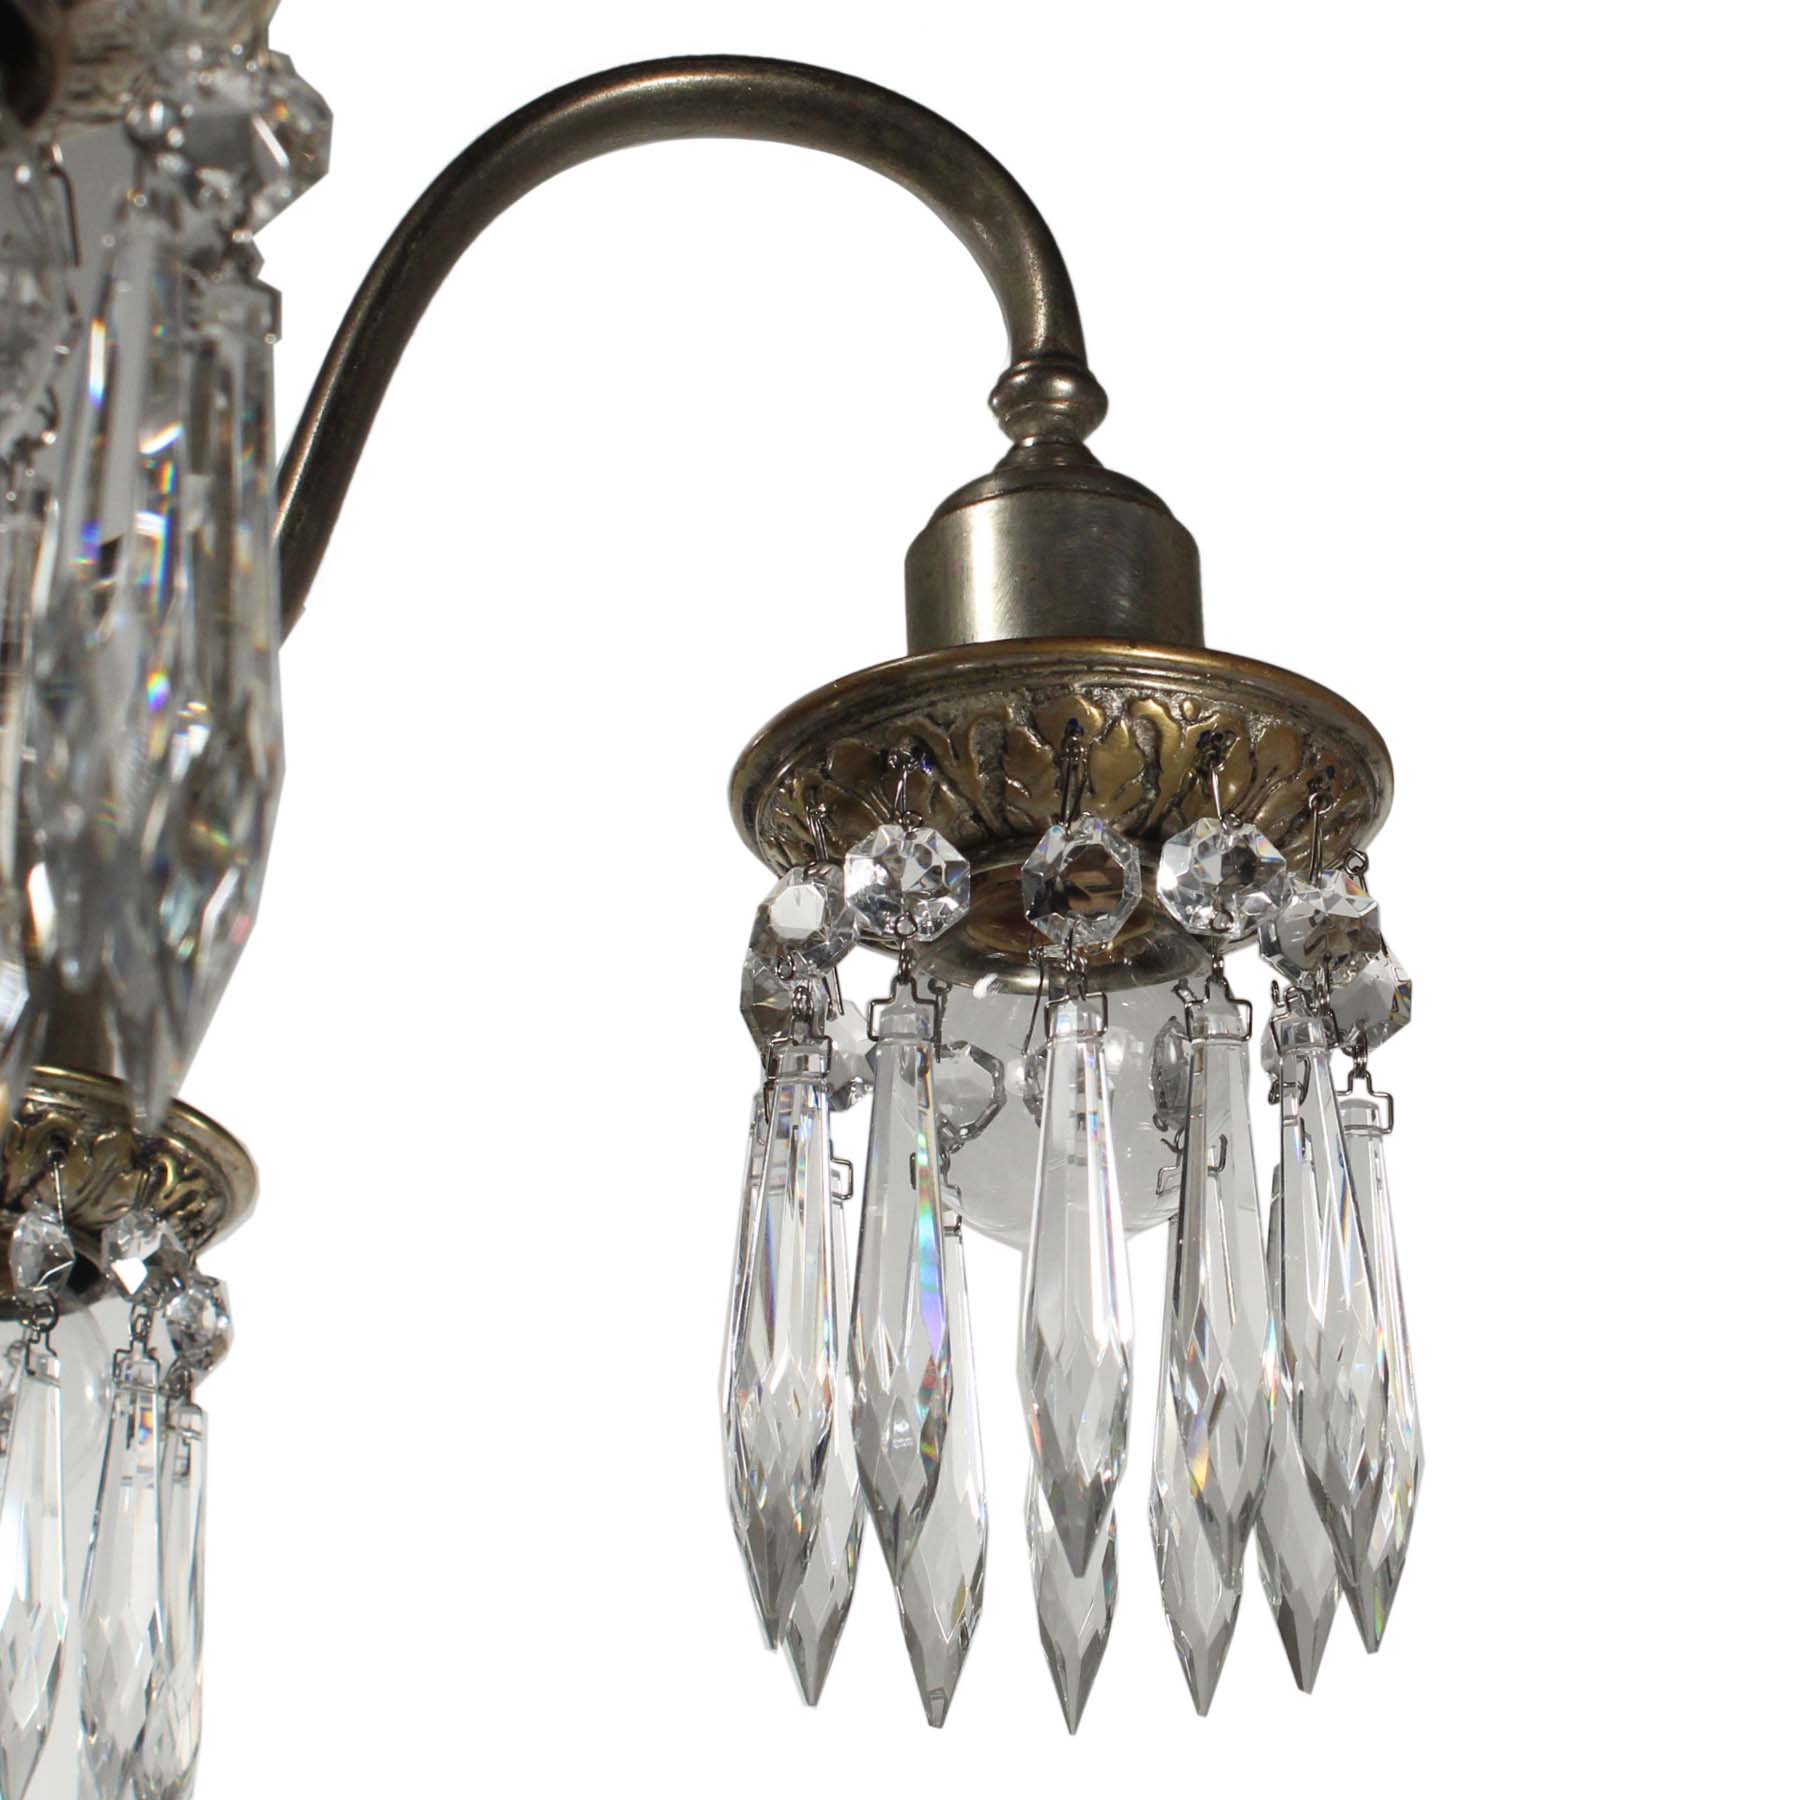 SOLD Antique Adam Style Silver Plate Chandelier with Prisms-67517